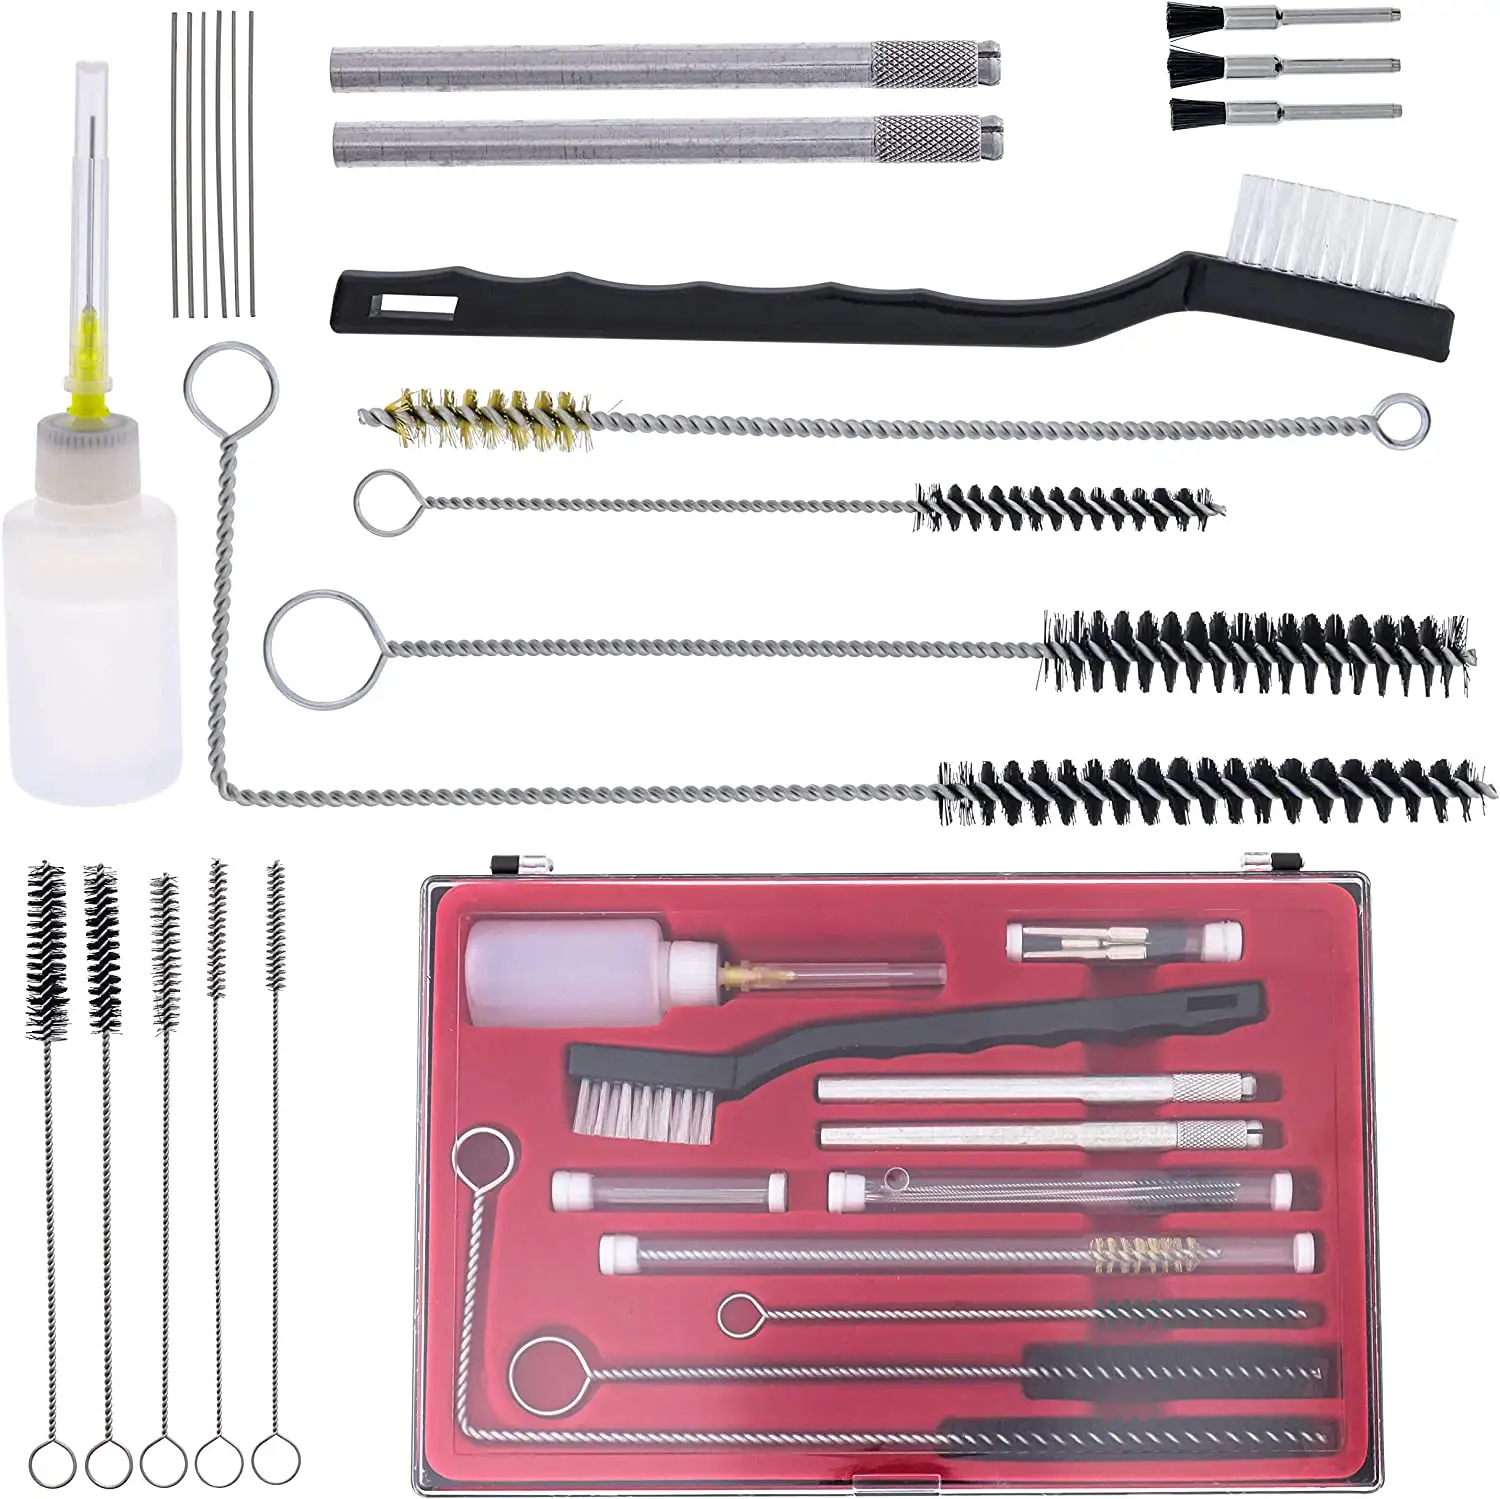 23 Piece Ultimate Spray Gun Cleaning Brush Kit with Case, Complete Set to Clean HVLP Paint Guns, Air Tools, Detail, Airbrush